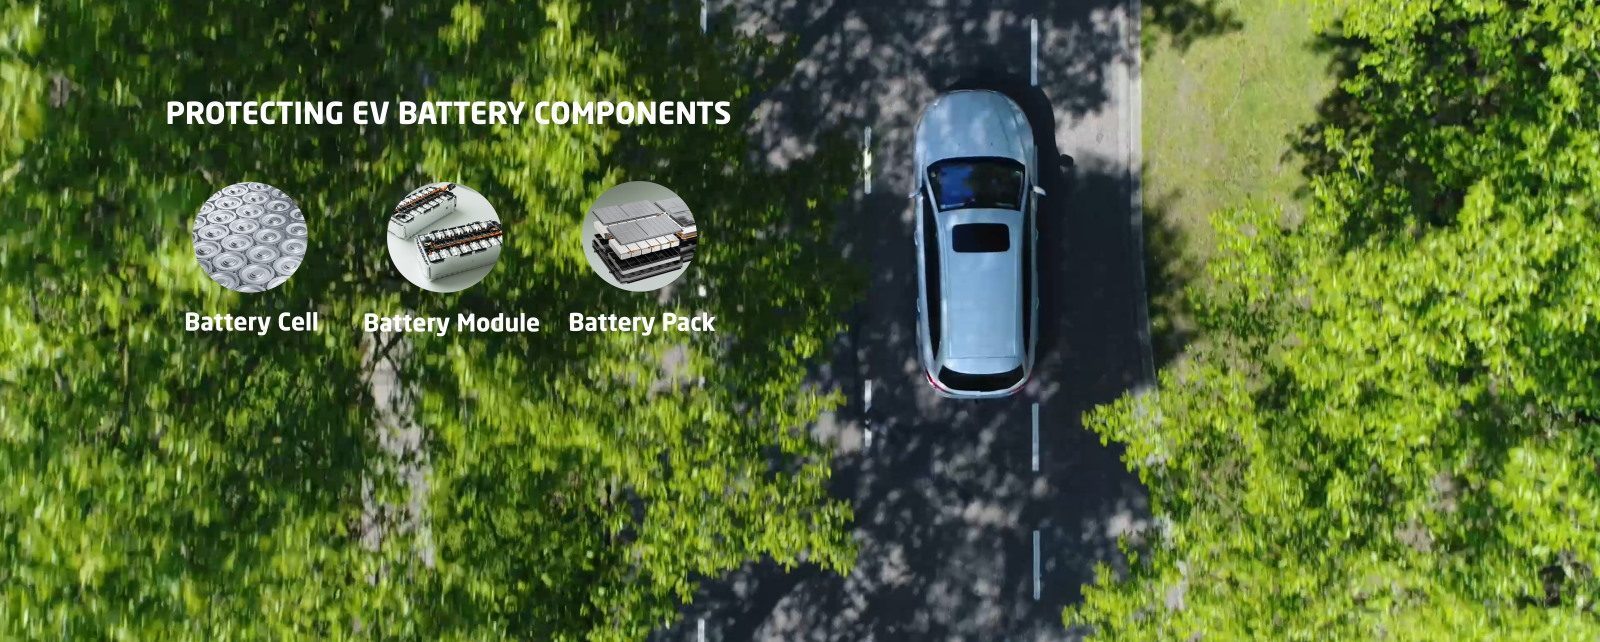 Multifunctional Coatings - Protecting EV Battery Components